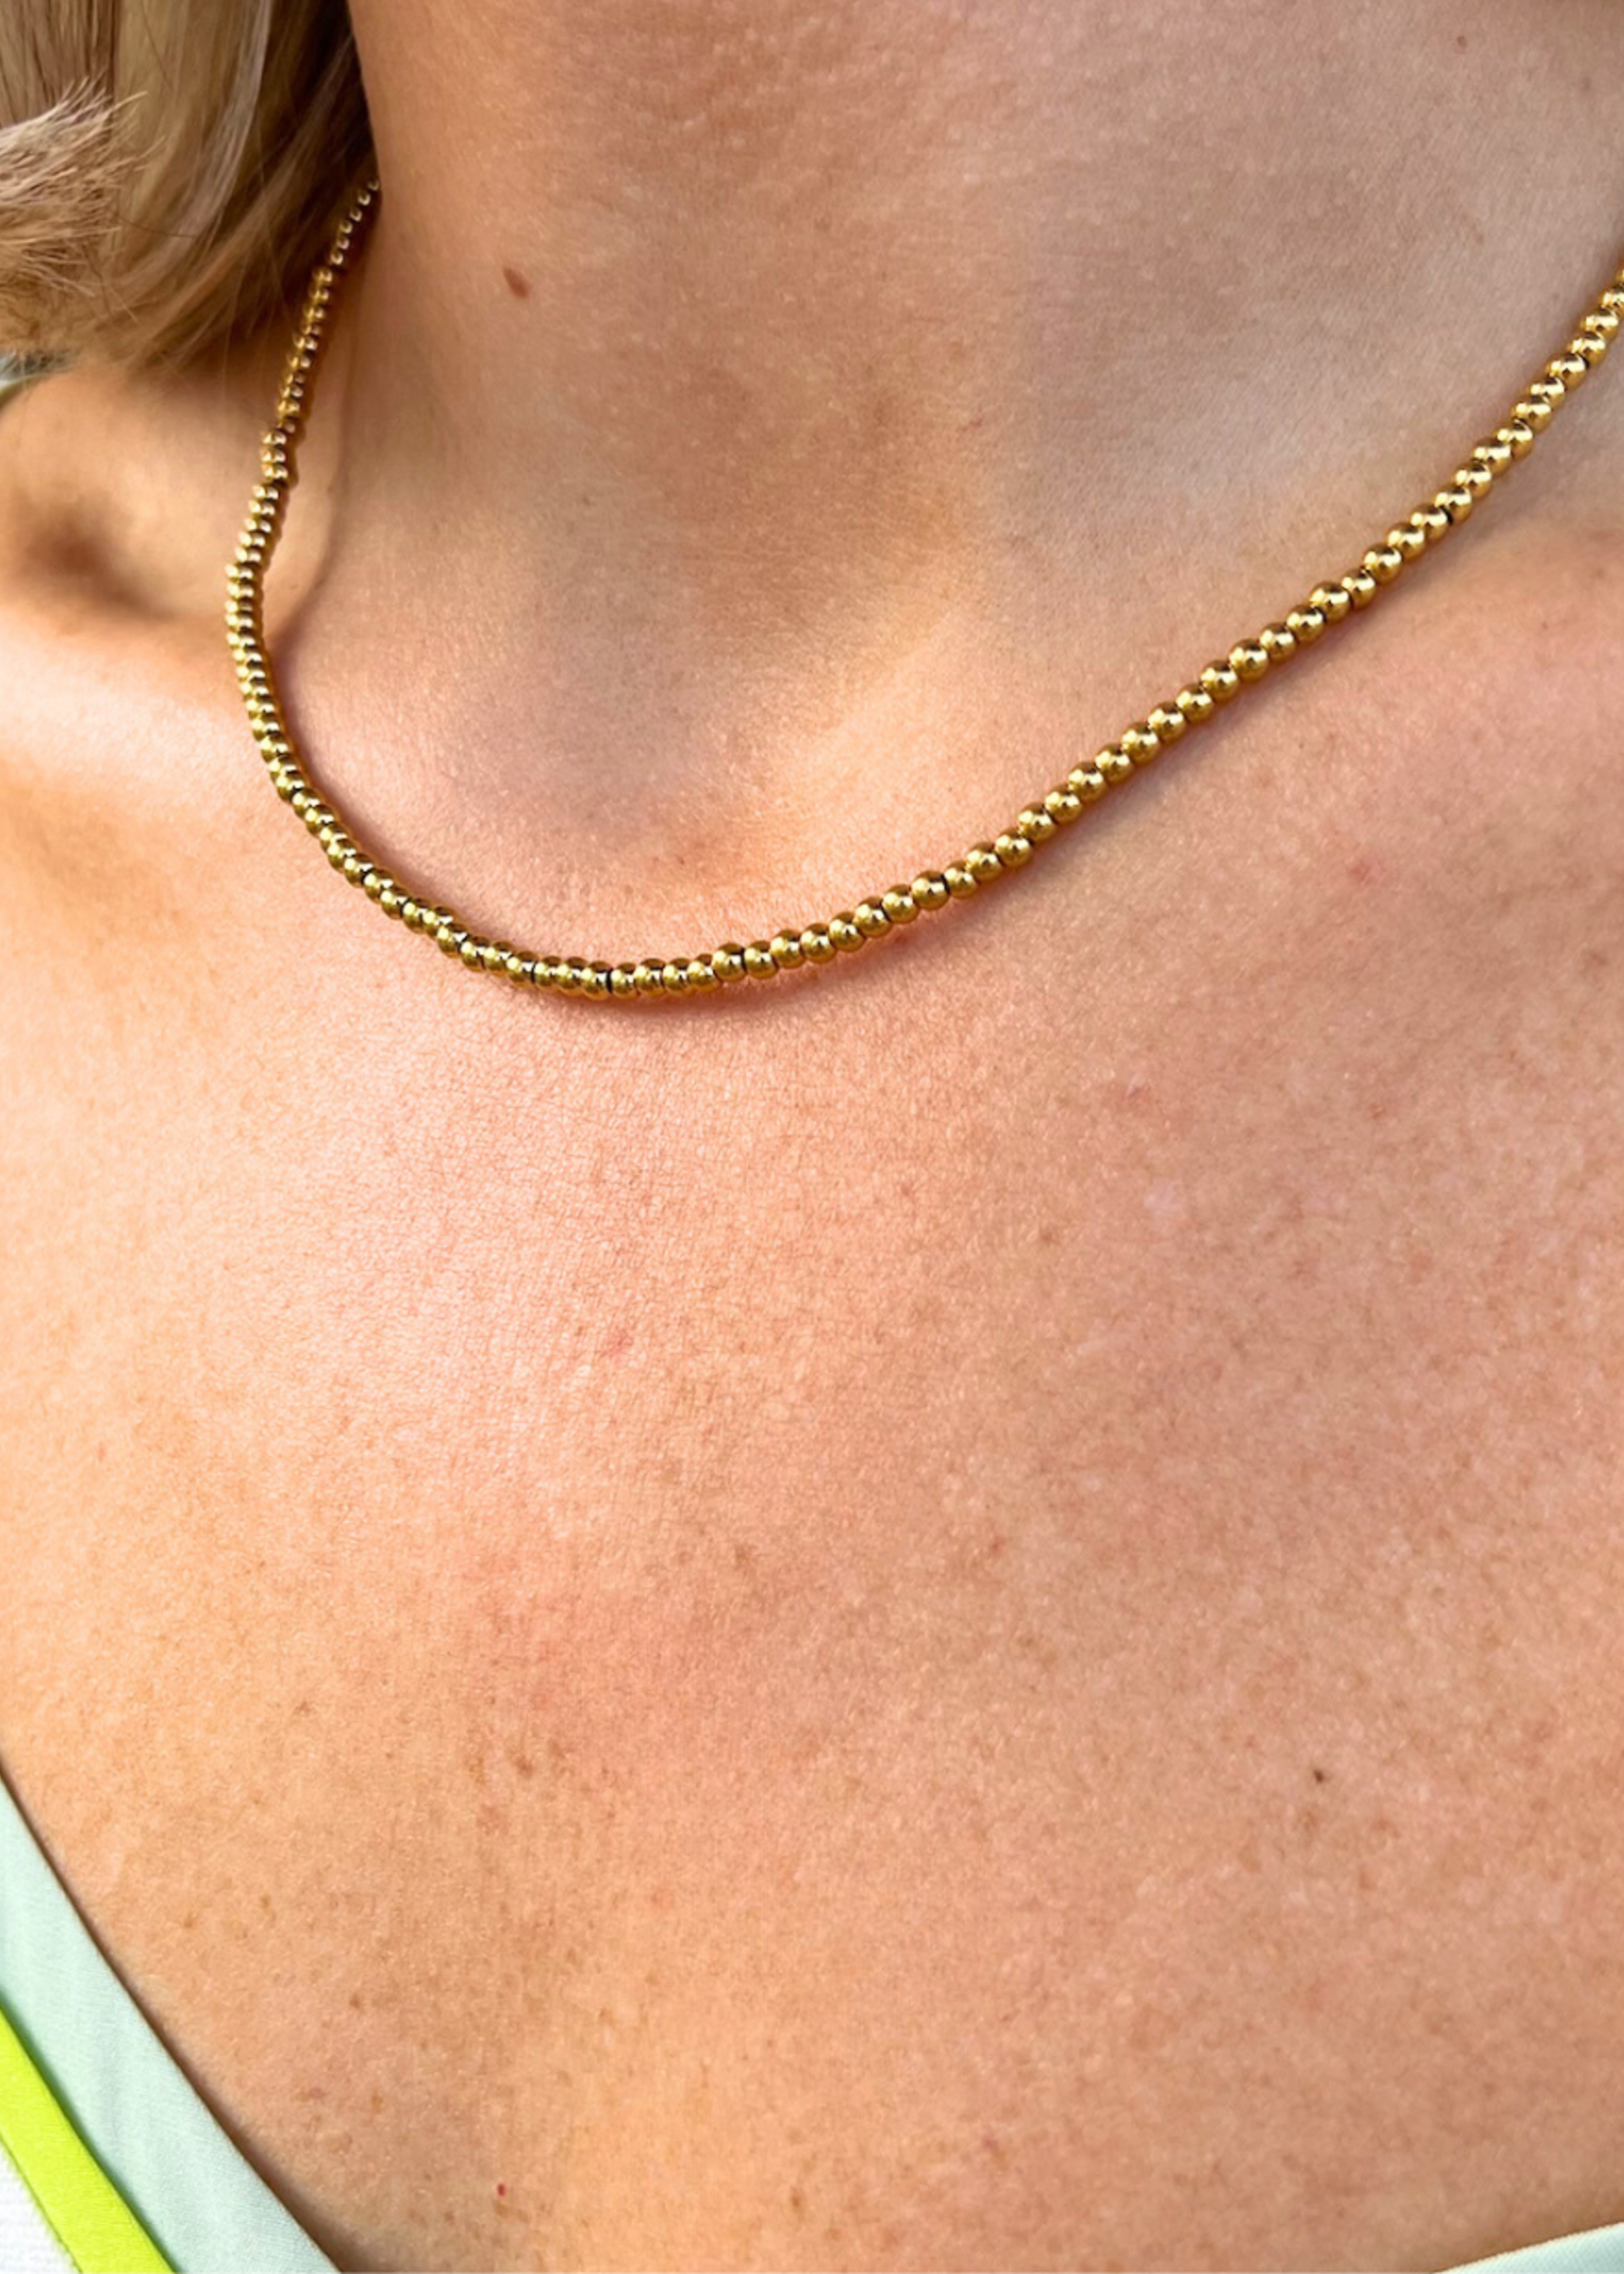 kiss me kate 3mm Gold Bead Necklace